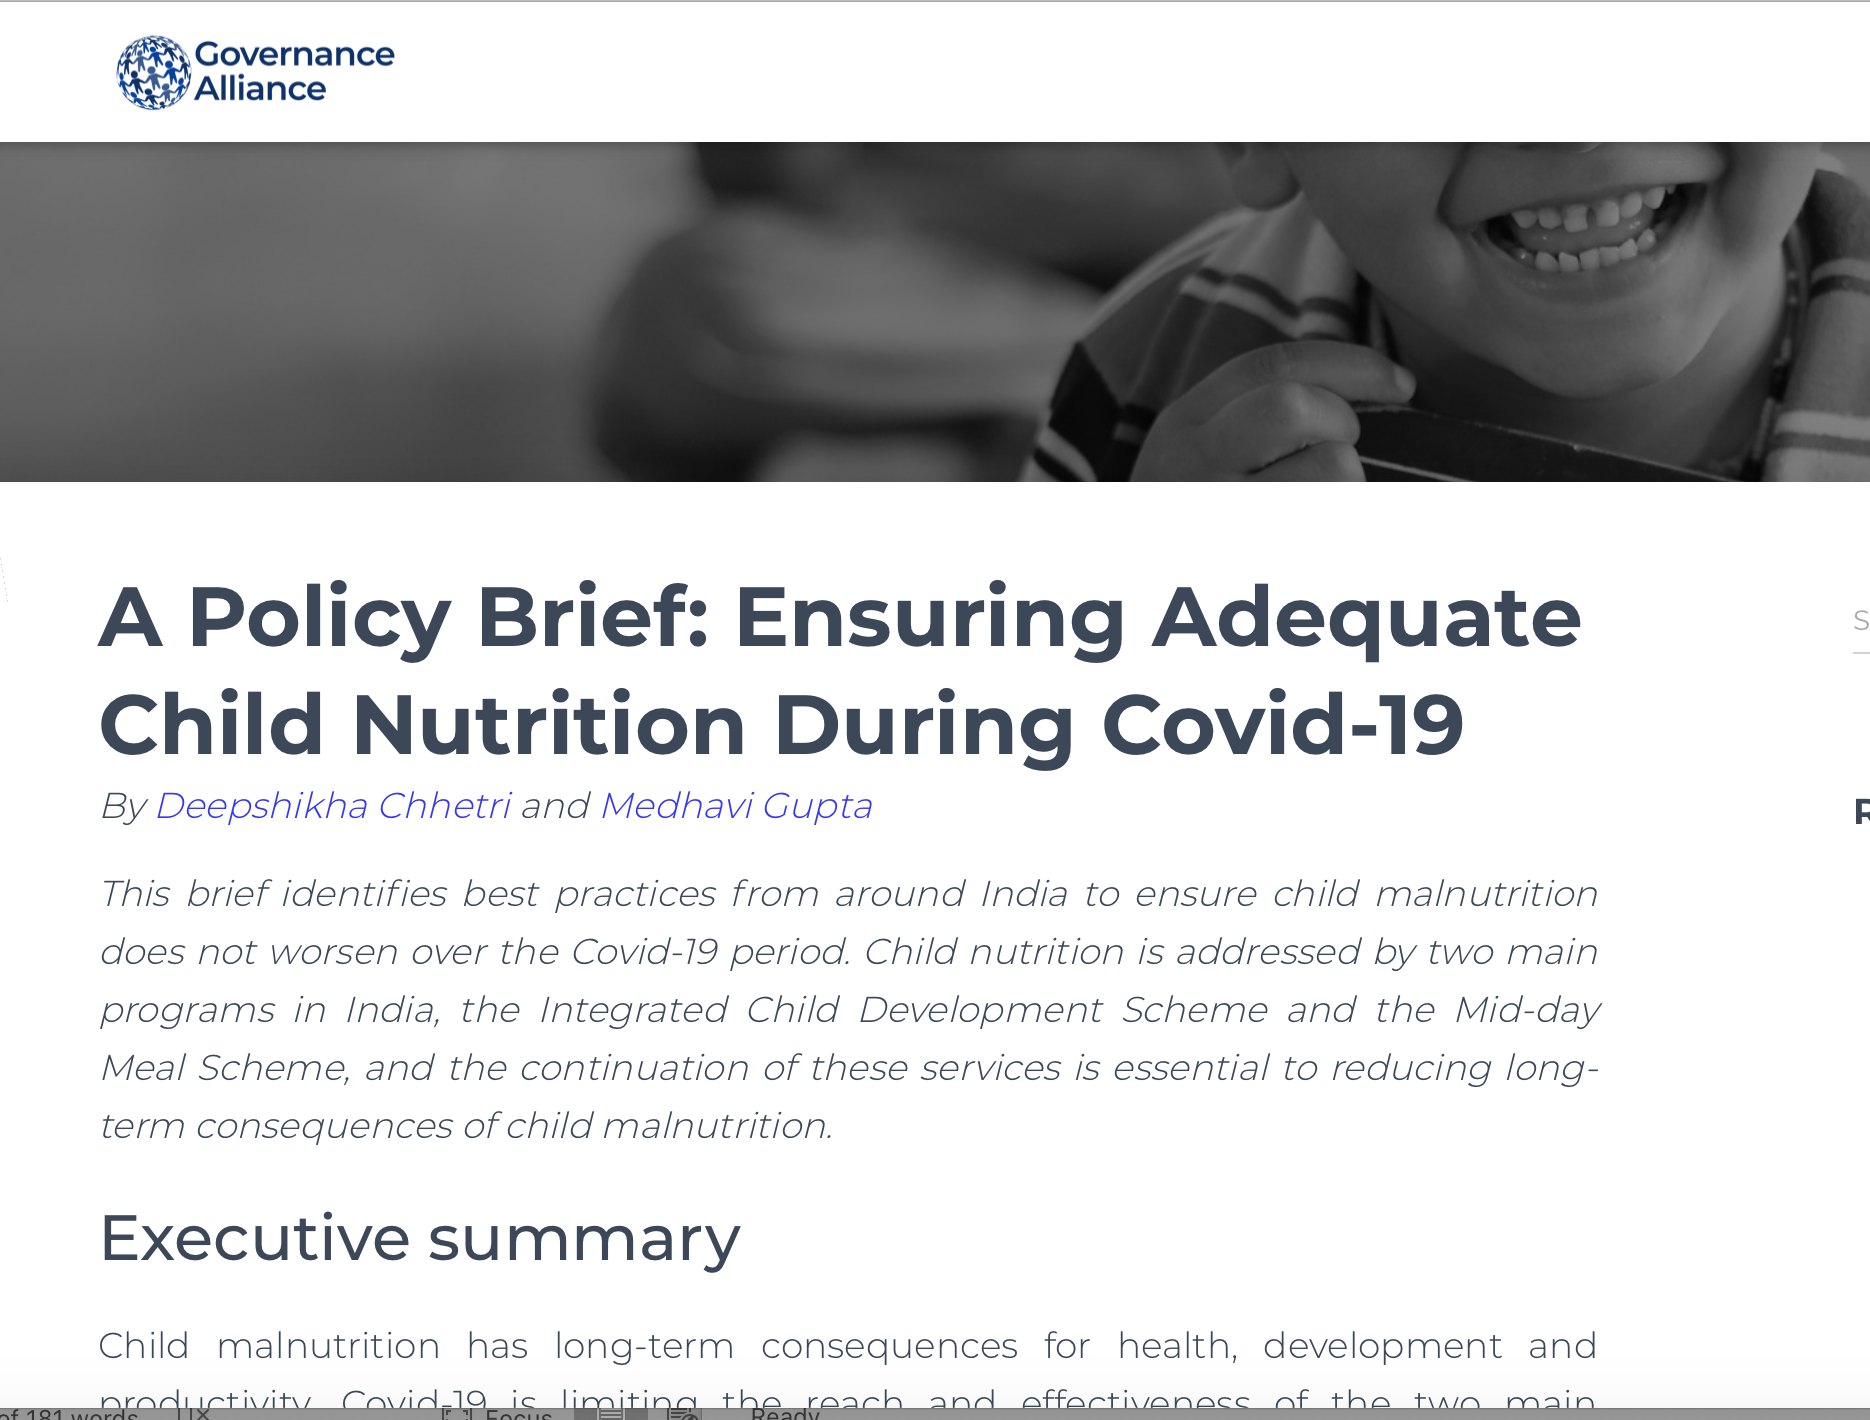 A policy brief: ensuring adequate child nutrition during COVID-19